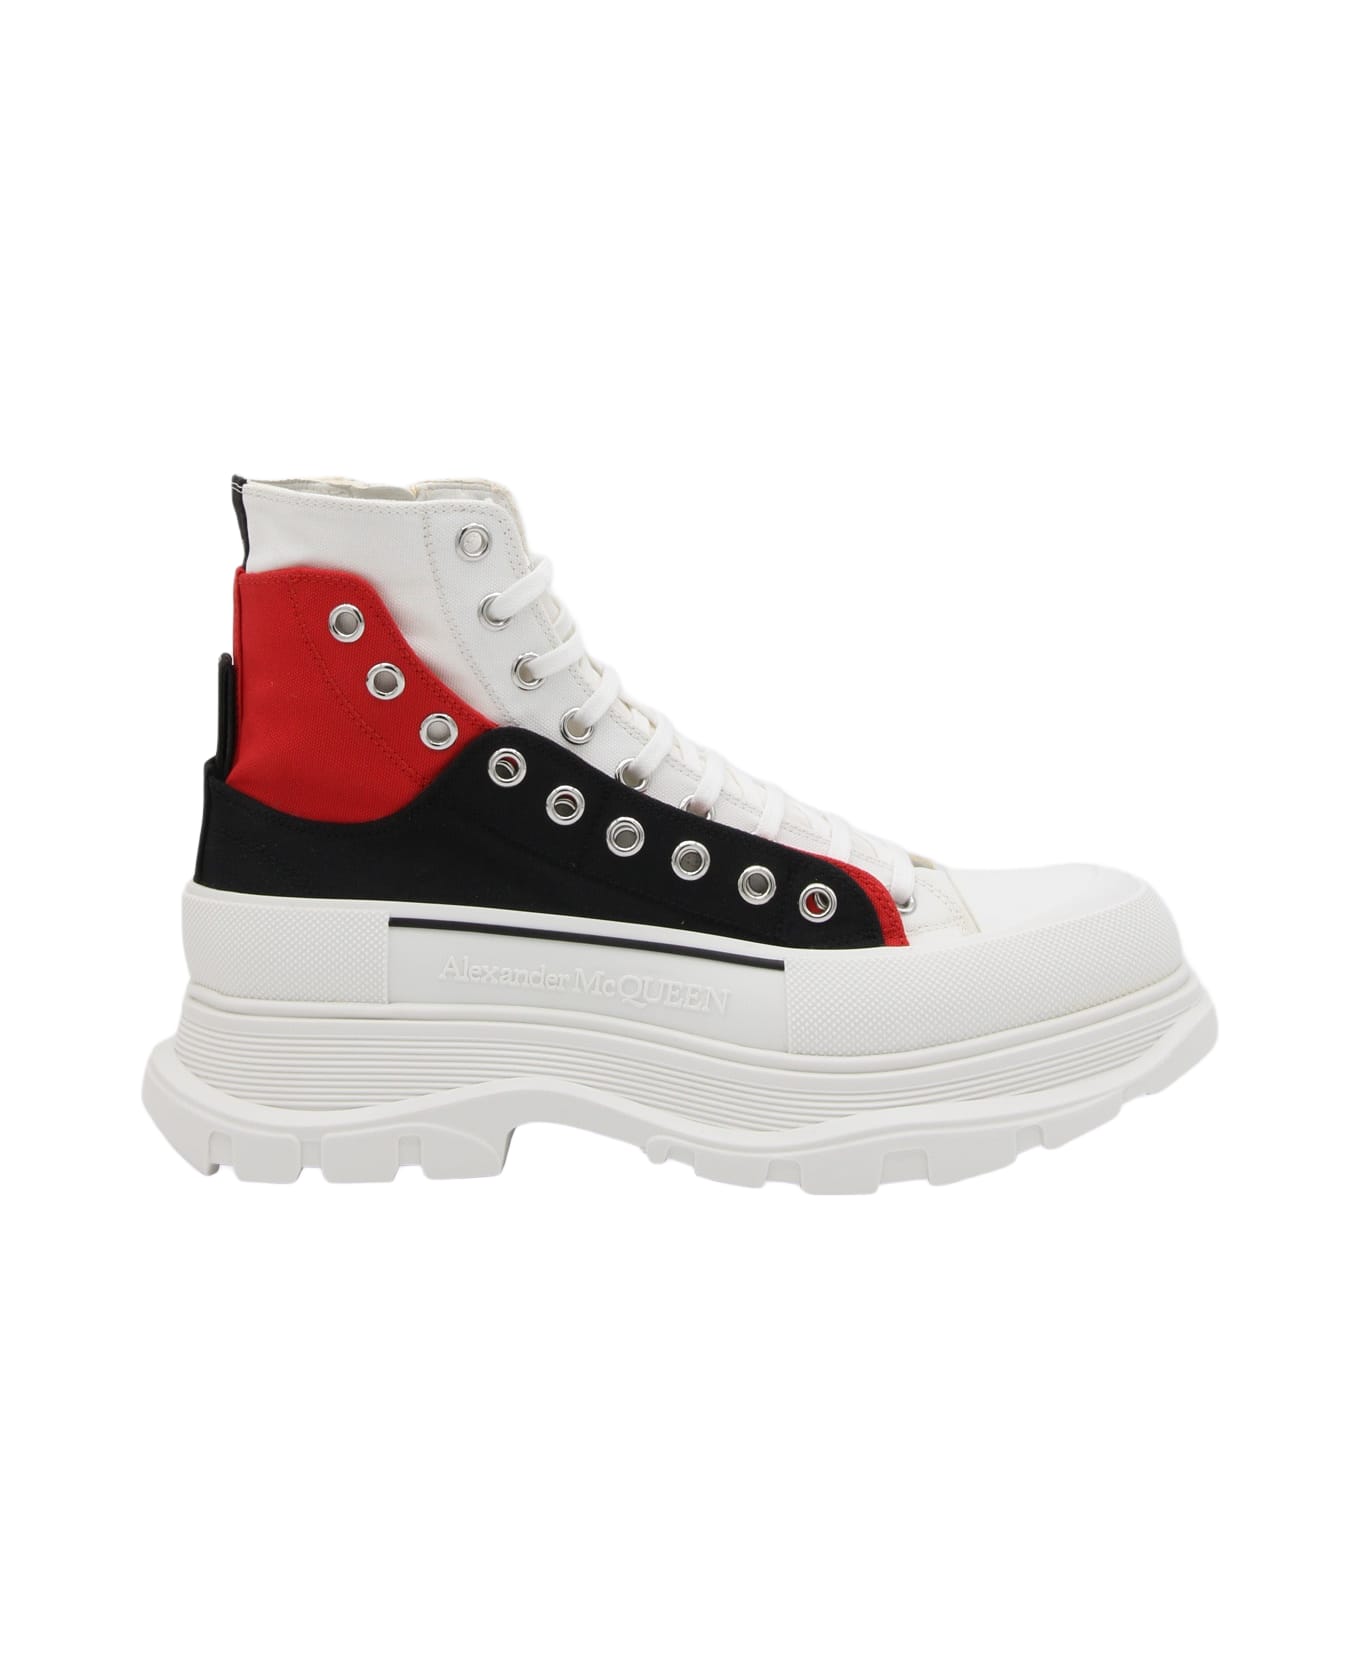 Alexander McQueen White Black And Red Canvas Boots - BLK/LR/WH スニーカー